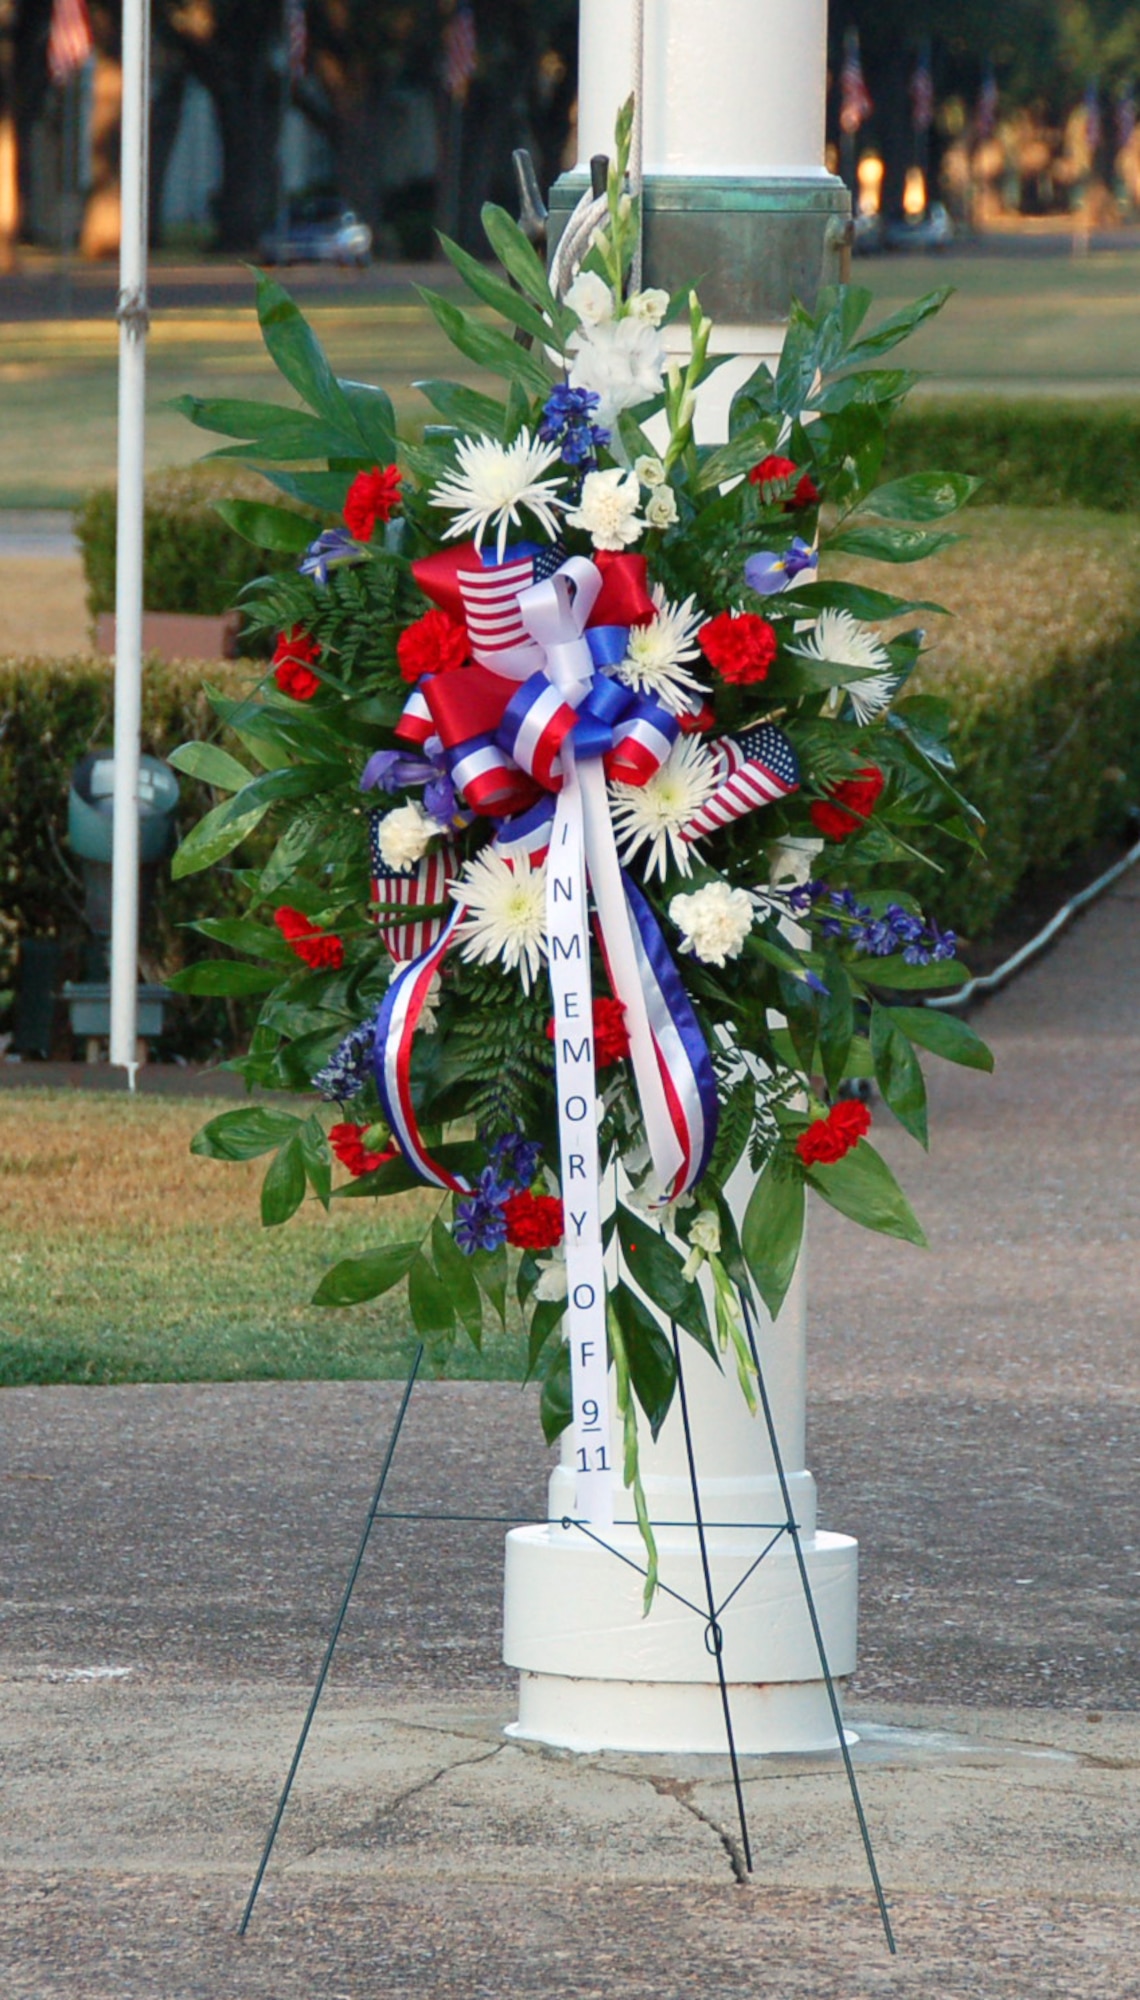 BARKSDALE AIR FORCE BASE, La. – Brig. Gens. Keith Kries, mobilization assistant to the Eighth Air Force commander, and John Mooney III, 307th Bomb Wing commander, walk to place a memorial wreath at the base of the 2nd Bomb Wing Headquarters flag pole during a 9/11 Reveille and Wreath Laying Ceremony on Barksdale Air Force Base Sept. 9, 2011. The ceremony included a moment of silence, which allowed Barksdale Airmen to reflect upon the tragic losses of Sept. 11, 2001, as well as the service and sacrifices made combating terrorism since that fateful day. (U.S. Air Force photo by Maj. Richard Komurek)